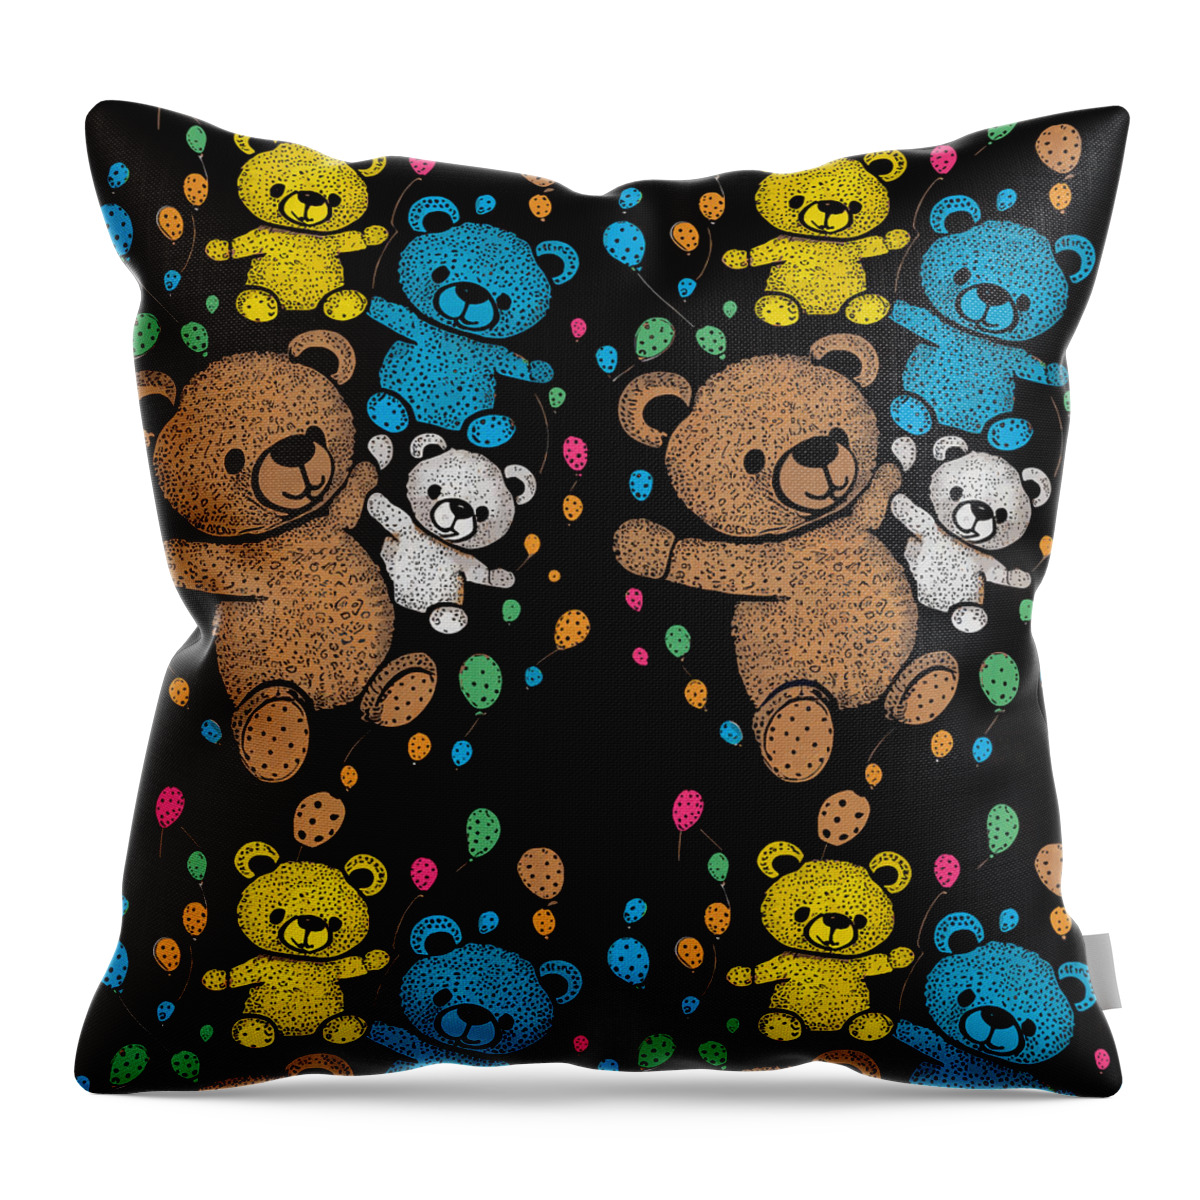 Series Throw Pillow featuring the digital art Teddies and balloons seamless pattern by Sabantha